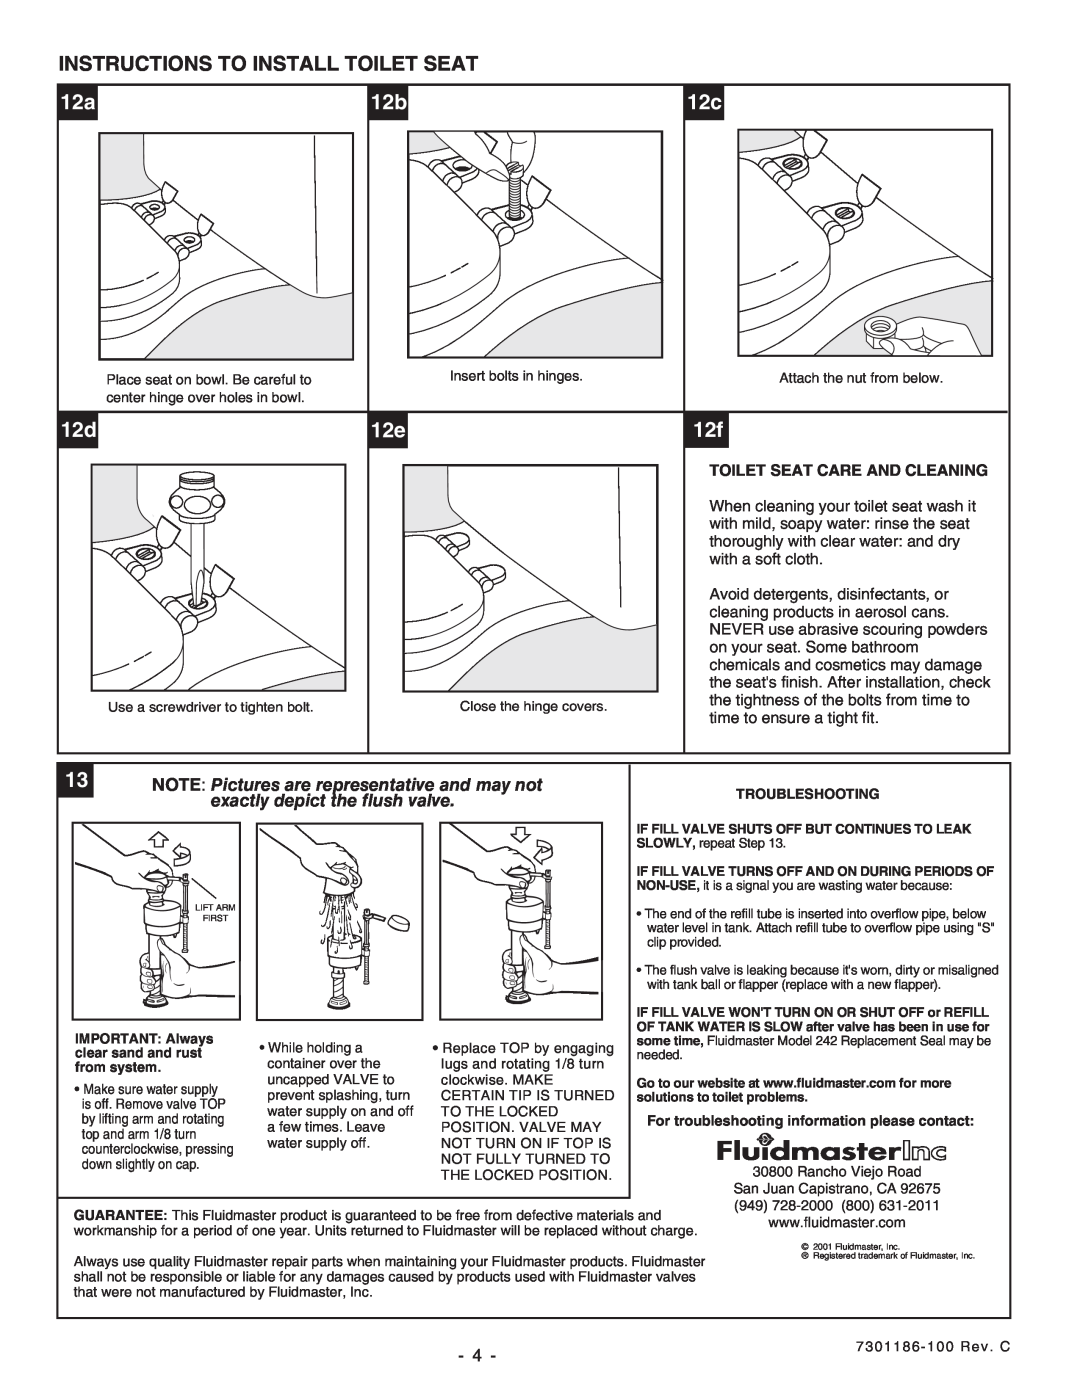 American Standard 2446 Instructions To Install Toilet Seat, NOTE Pictures are representative and may not 